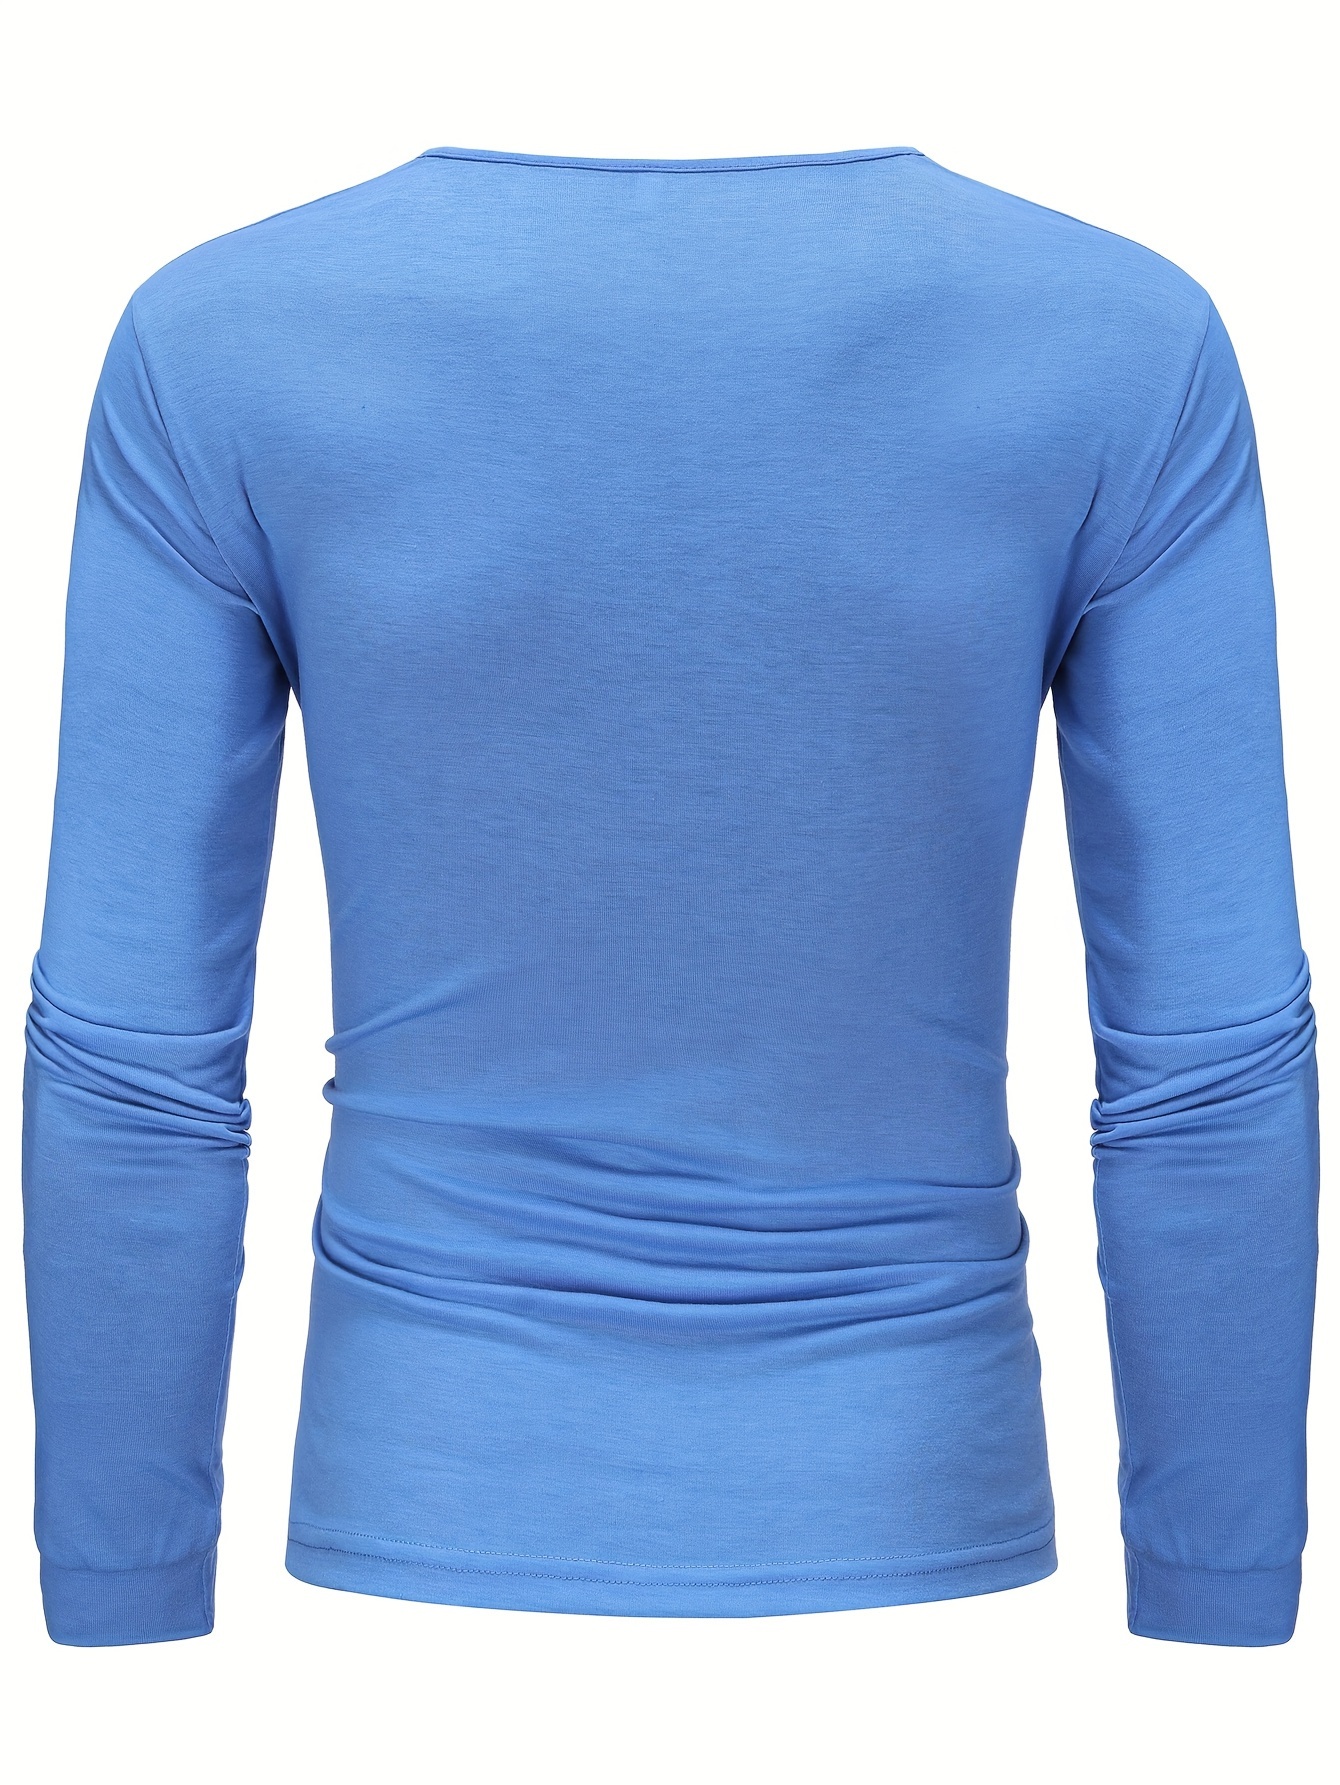  Long Sleeve Shirts for Men Henley Shirts Solid Color